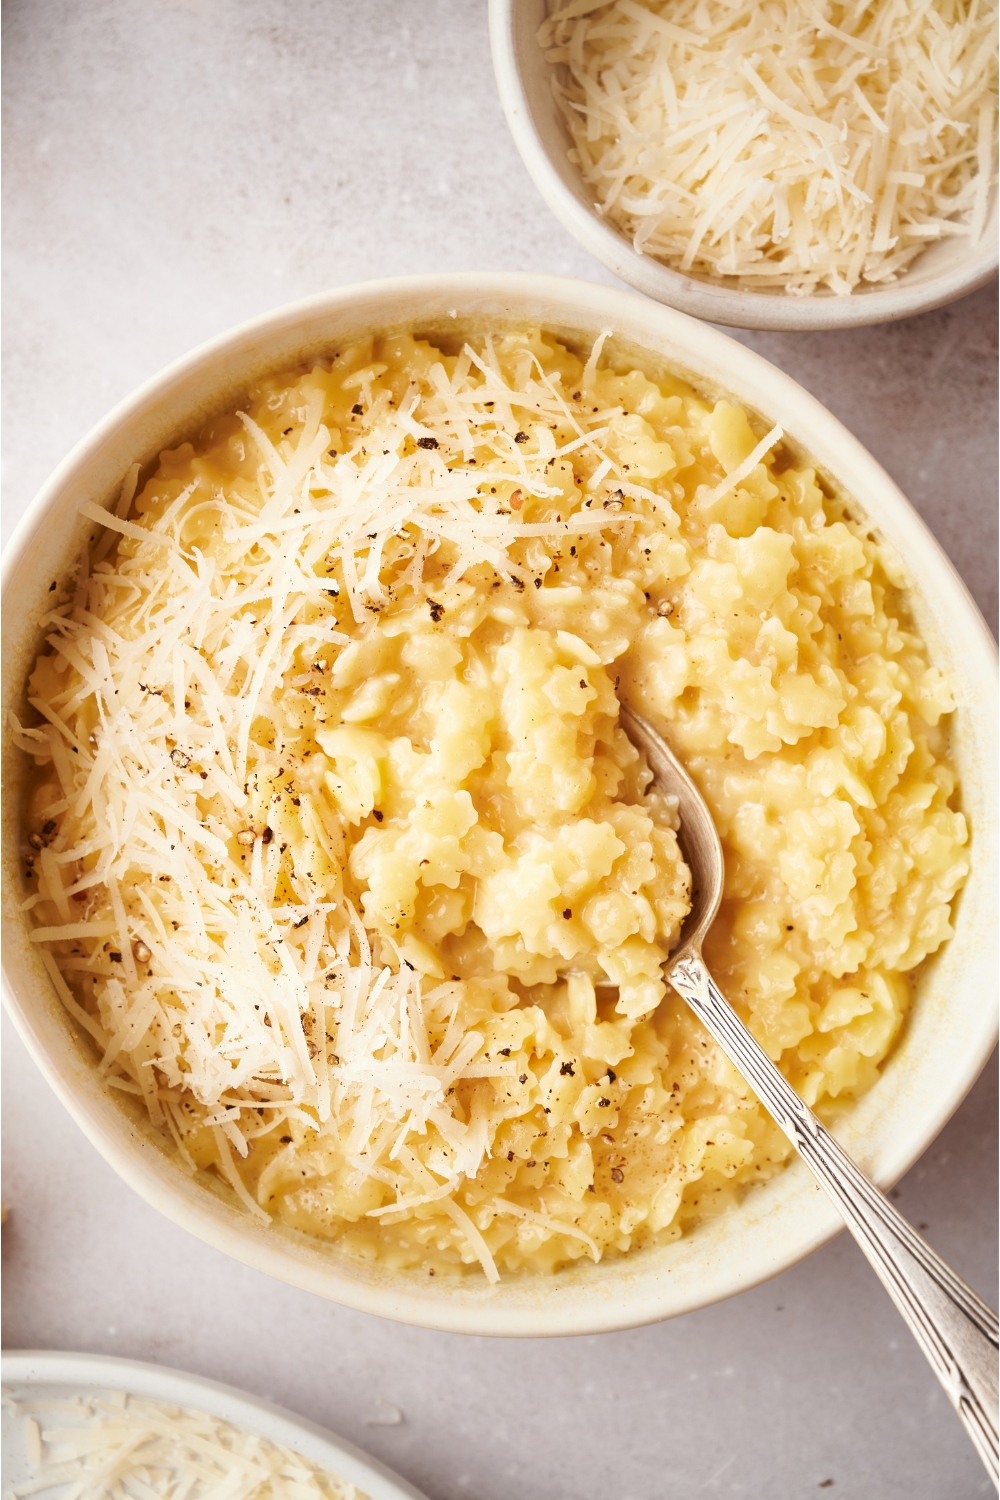 A bowl of pastina topped with parmesan cheese and pepper. A spoon is in the bowl.